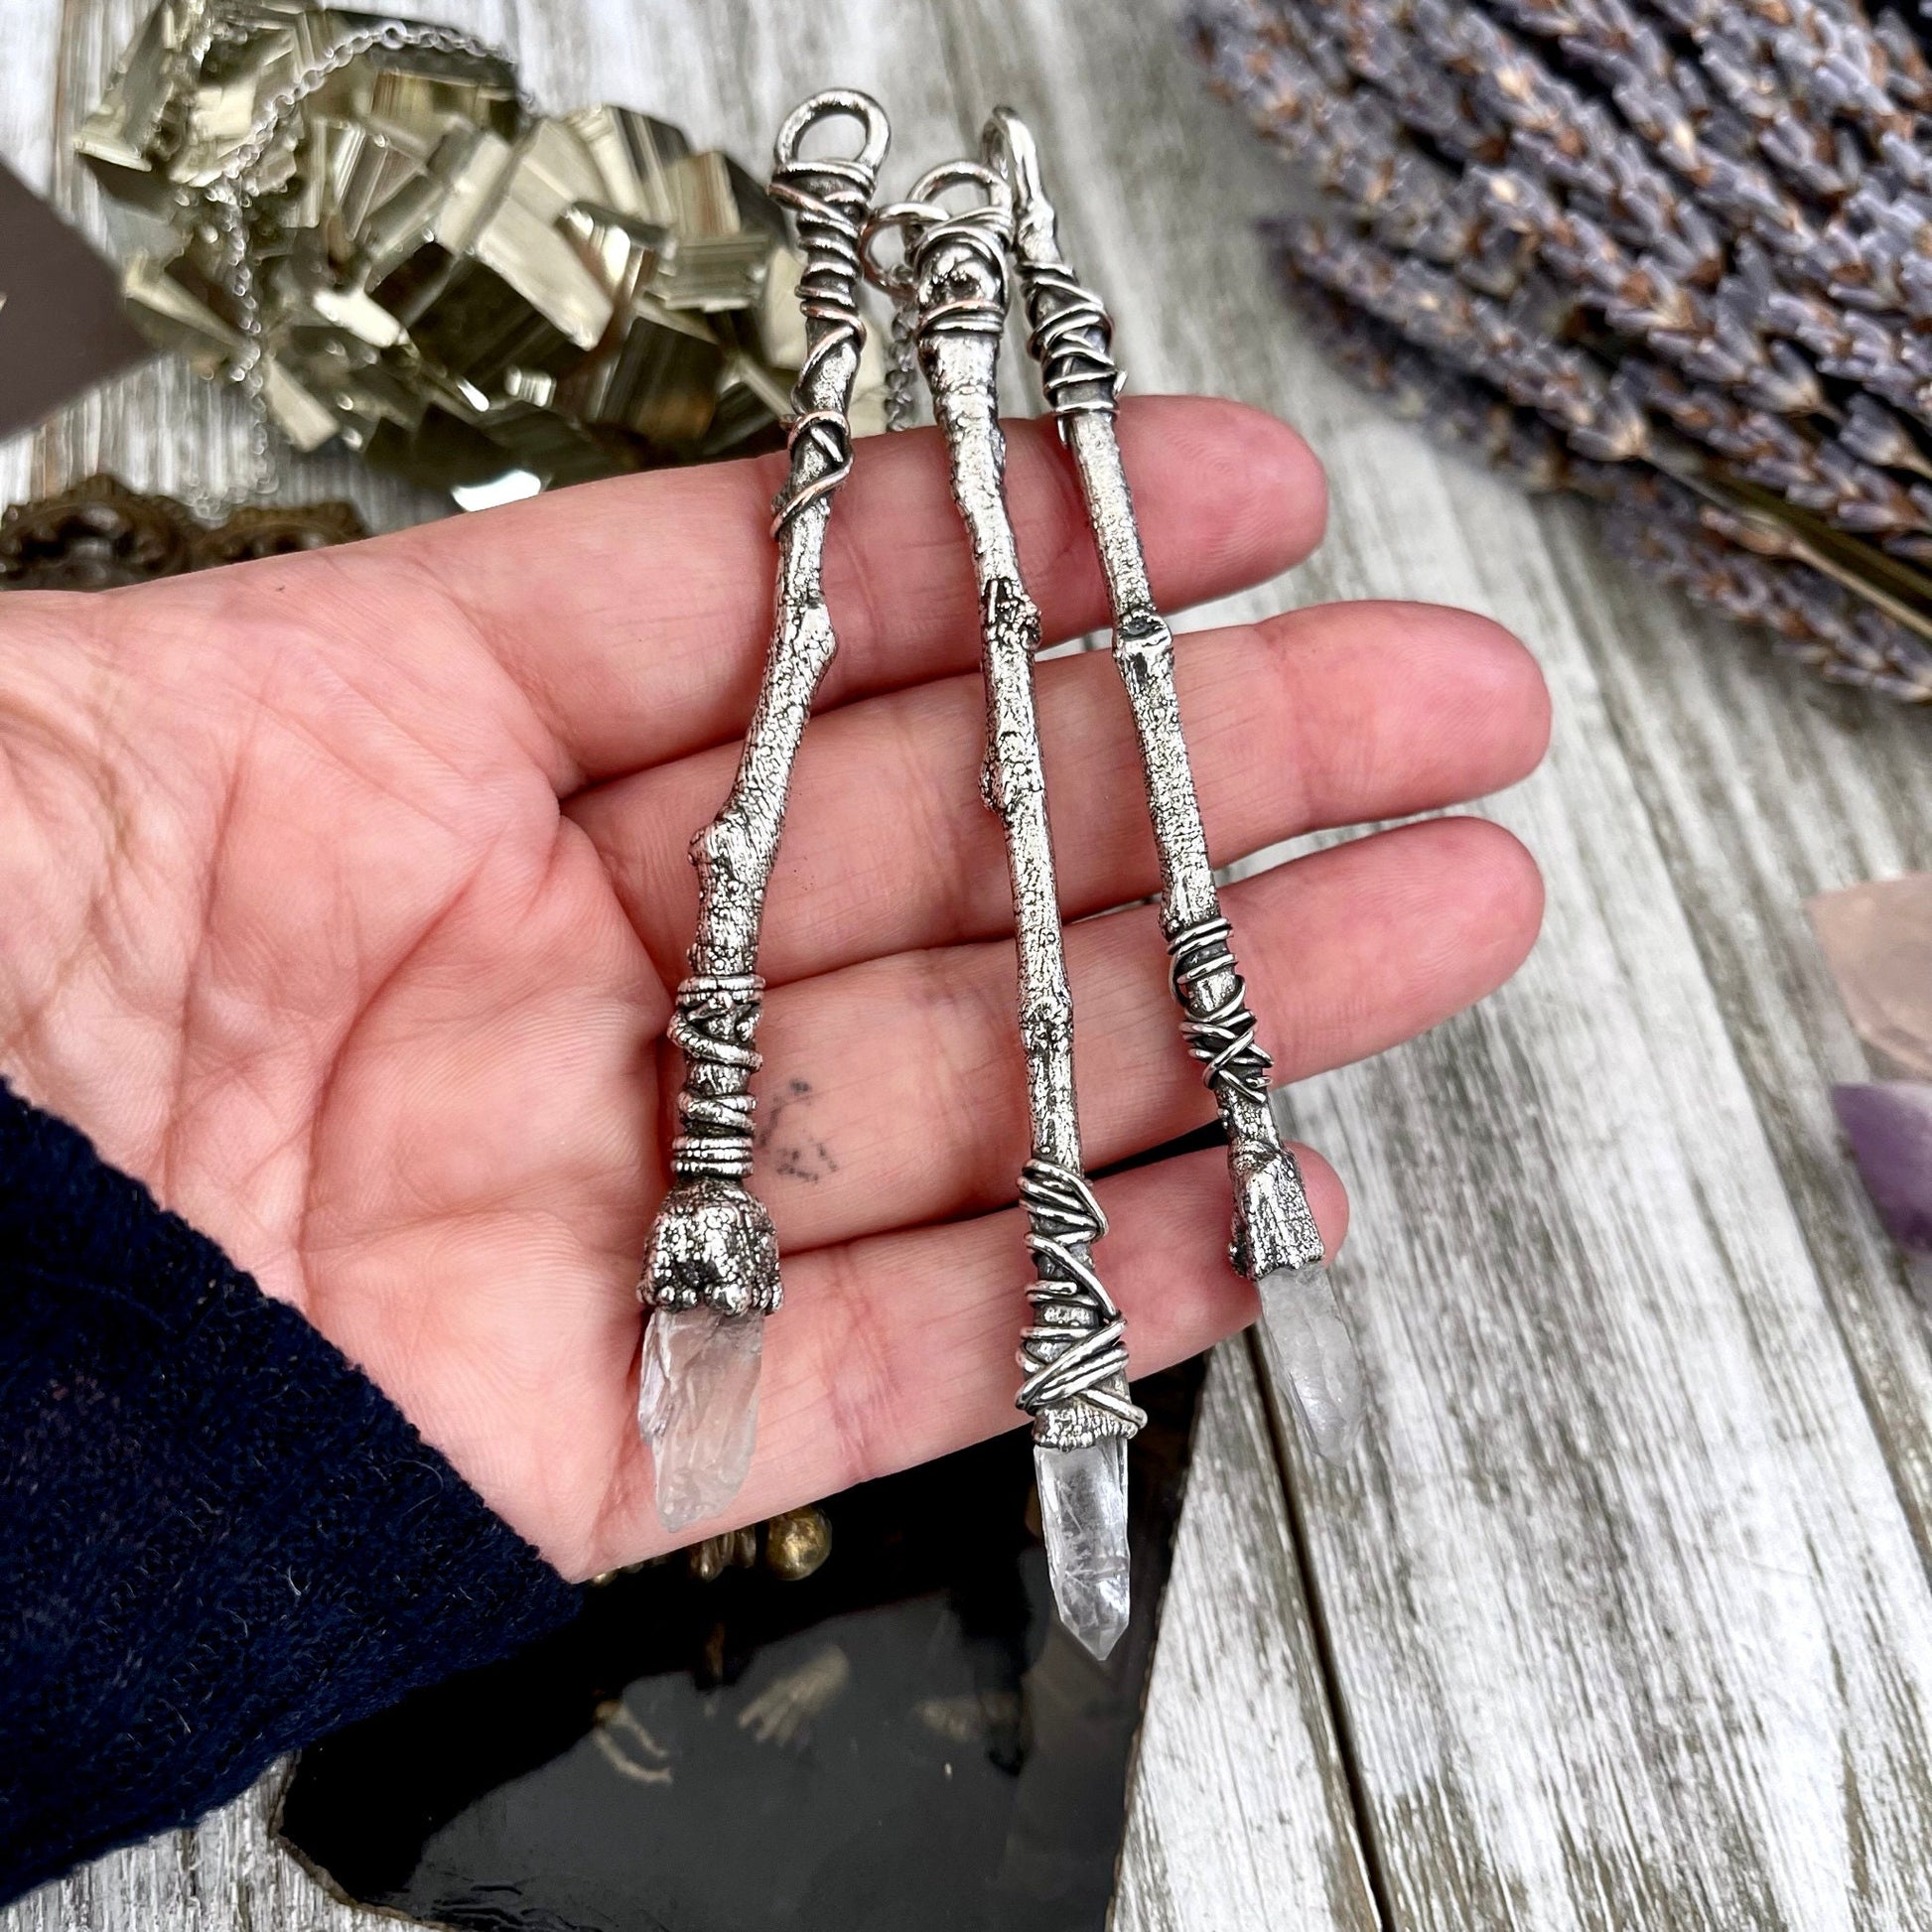 Clear Quartz Jewelry, Crystal Necklaces, Crystal Wand, Crystal Wizard Wand, electroformed, Etsy ID: 1558537088, FOXLARK- NECKLACES, Gothic Jewelry, Halloween Jewelry, Jewelry, Necklaces, Raw Crystal Jewelry, Raw Crystal Necklace, Raw Quartz Necklace, Whol